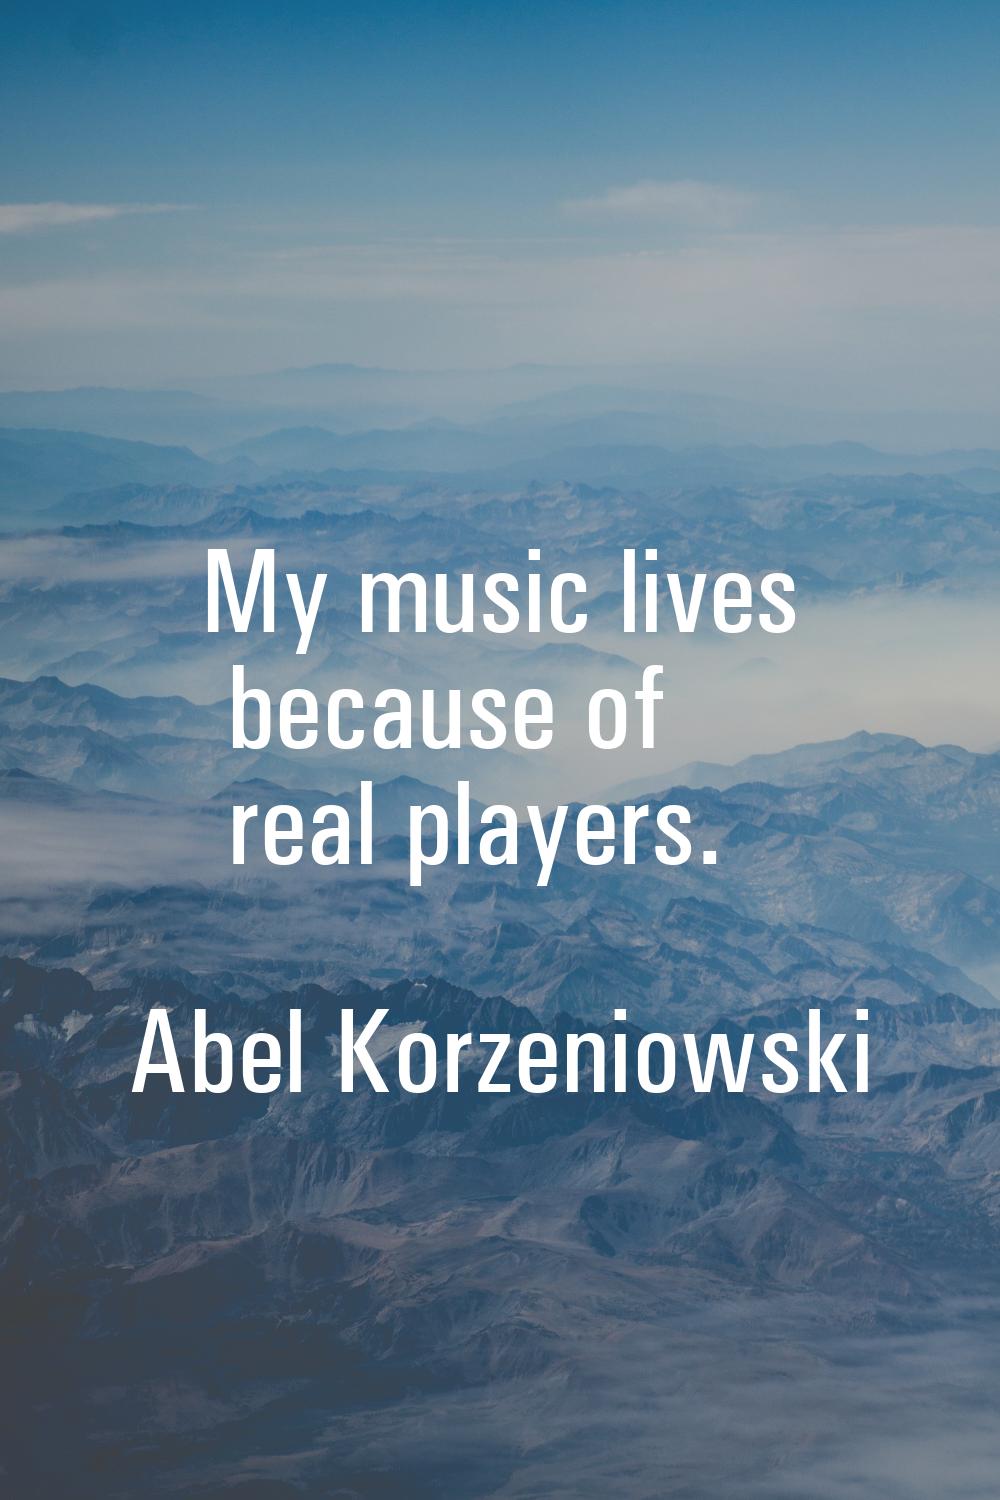 My music lives because of real players.